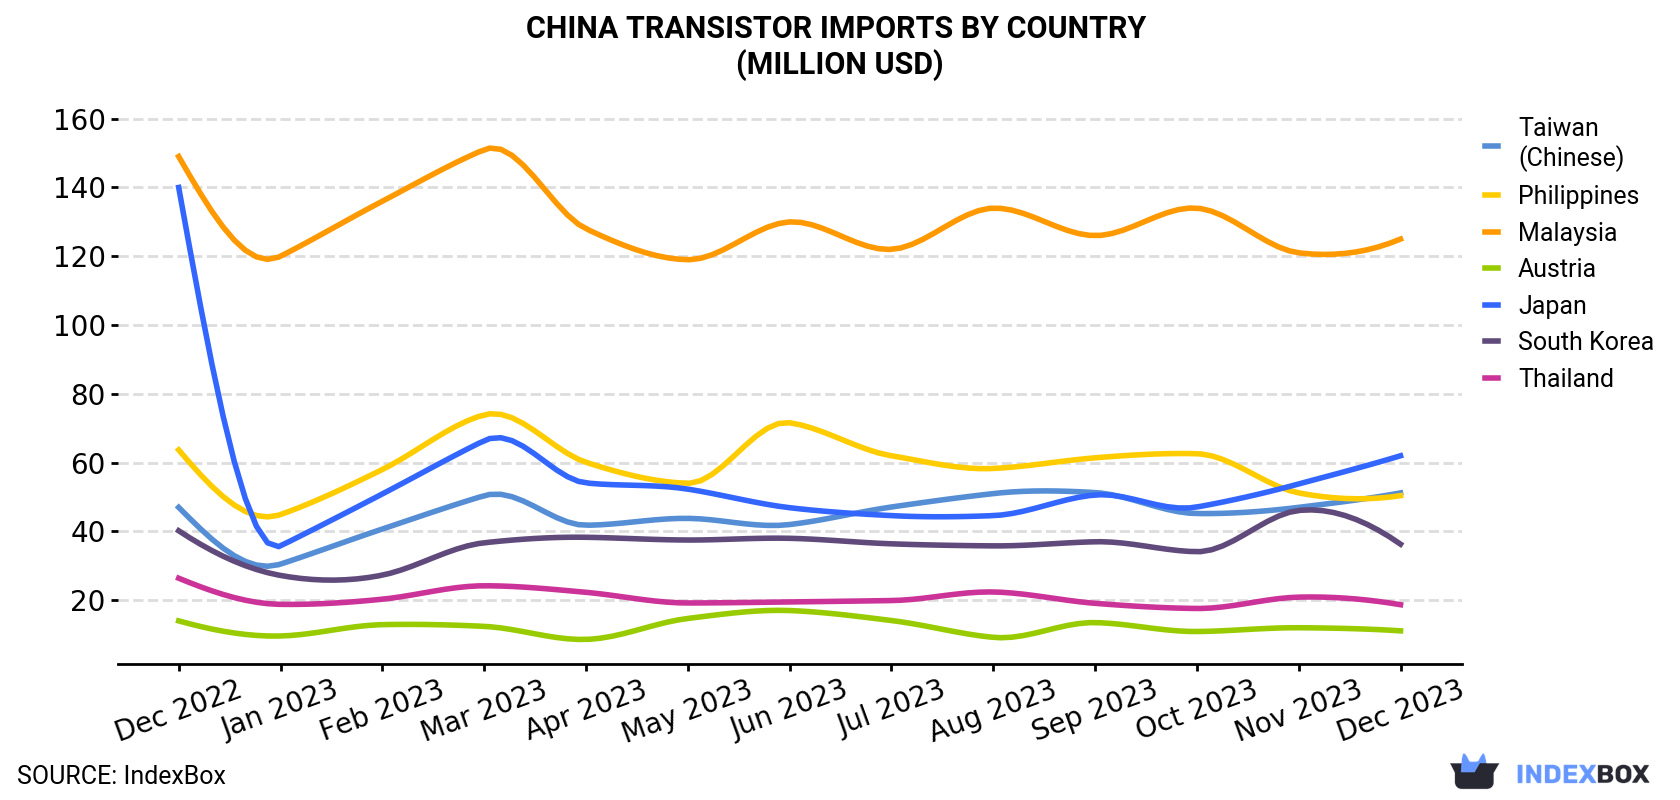 China Transistor Imports By Country (Million USD)